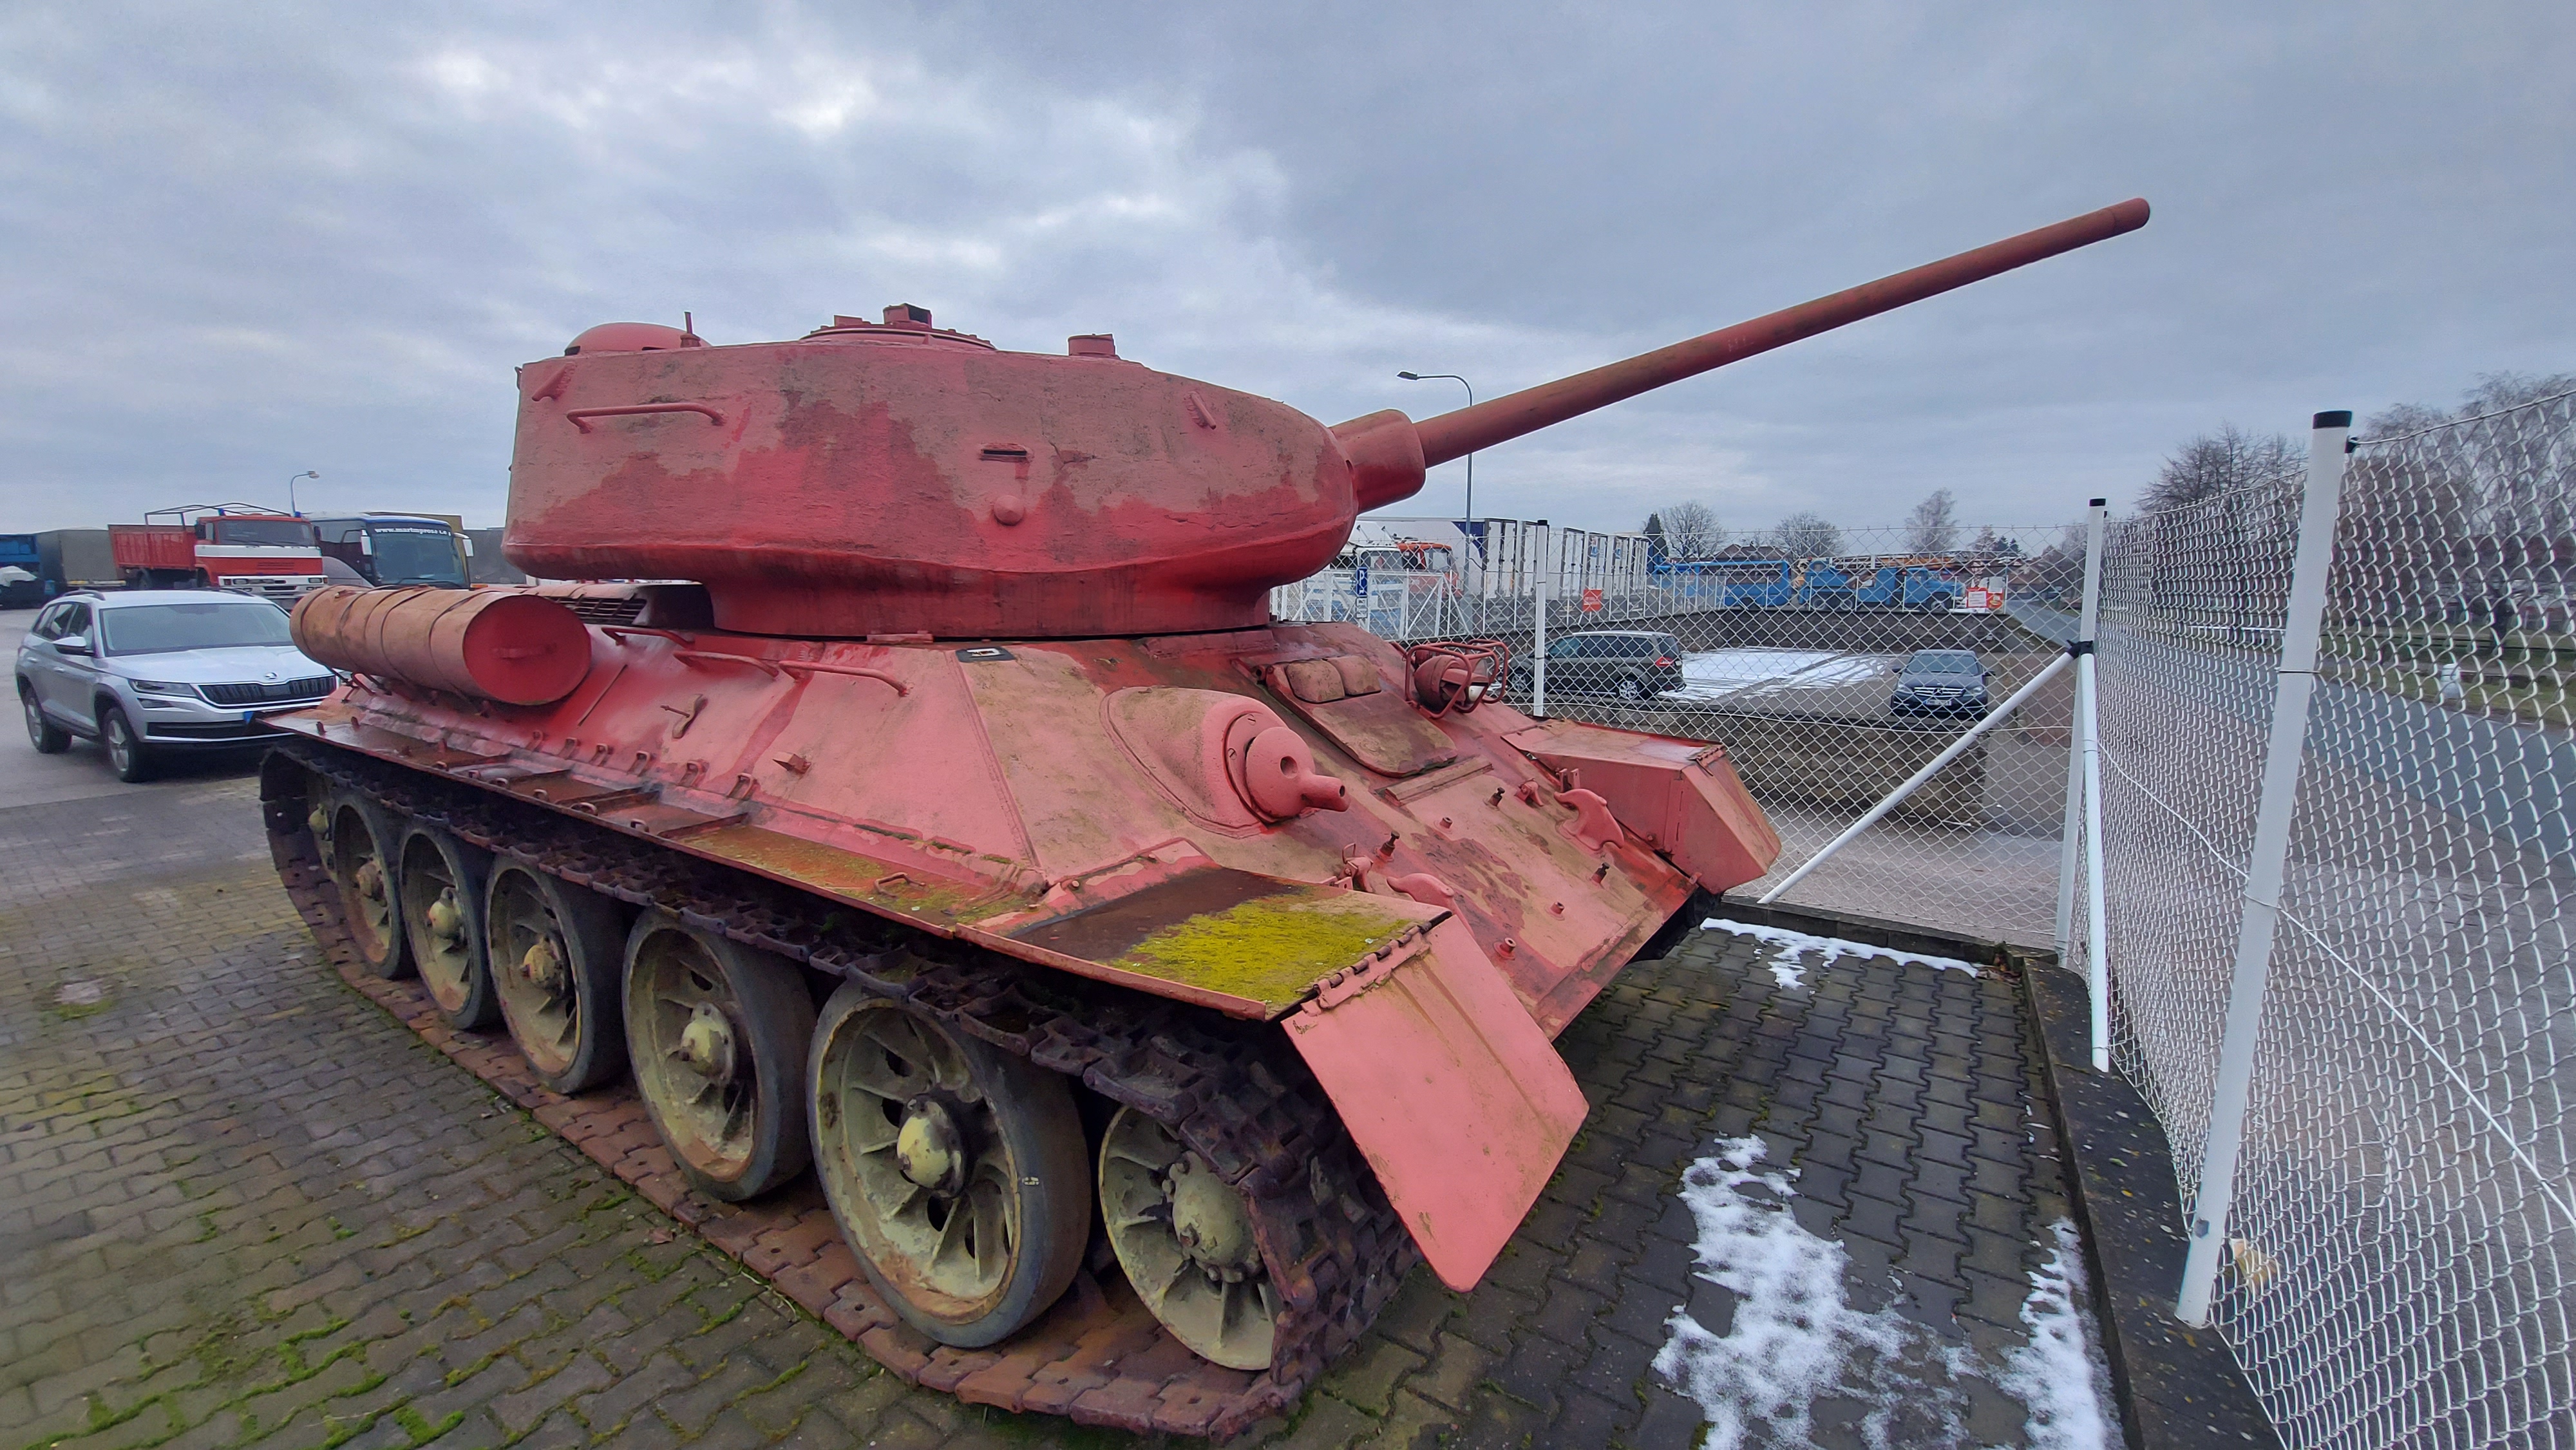 https://s1.cdn.autoevolution.com/images/news/someone-surrendered-a-pink-tank-under-ongoing-weapon-amnesty-program-159032_1.jpg